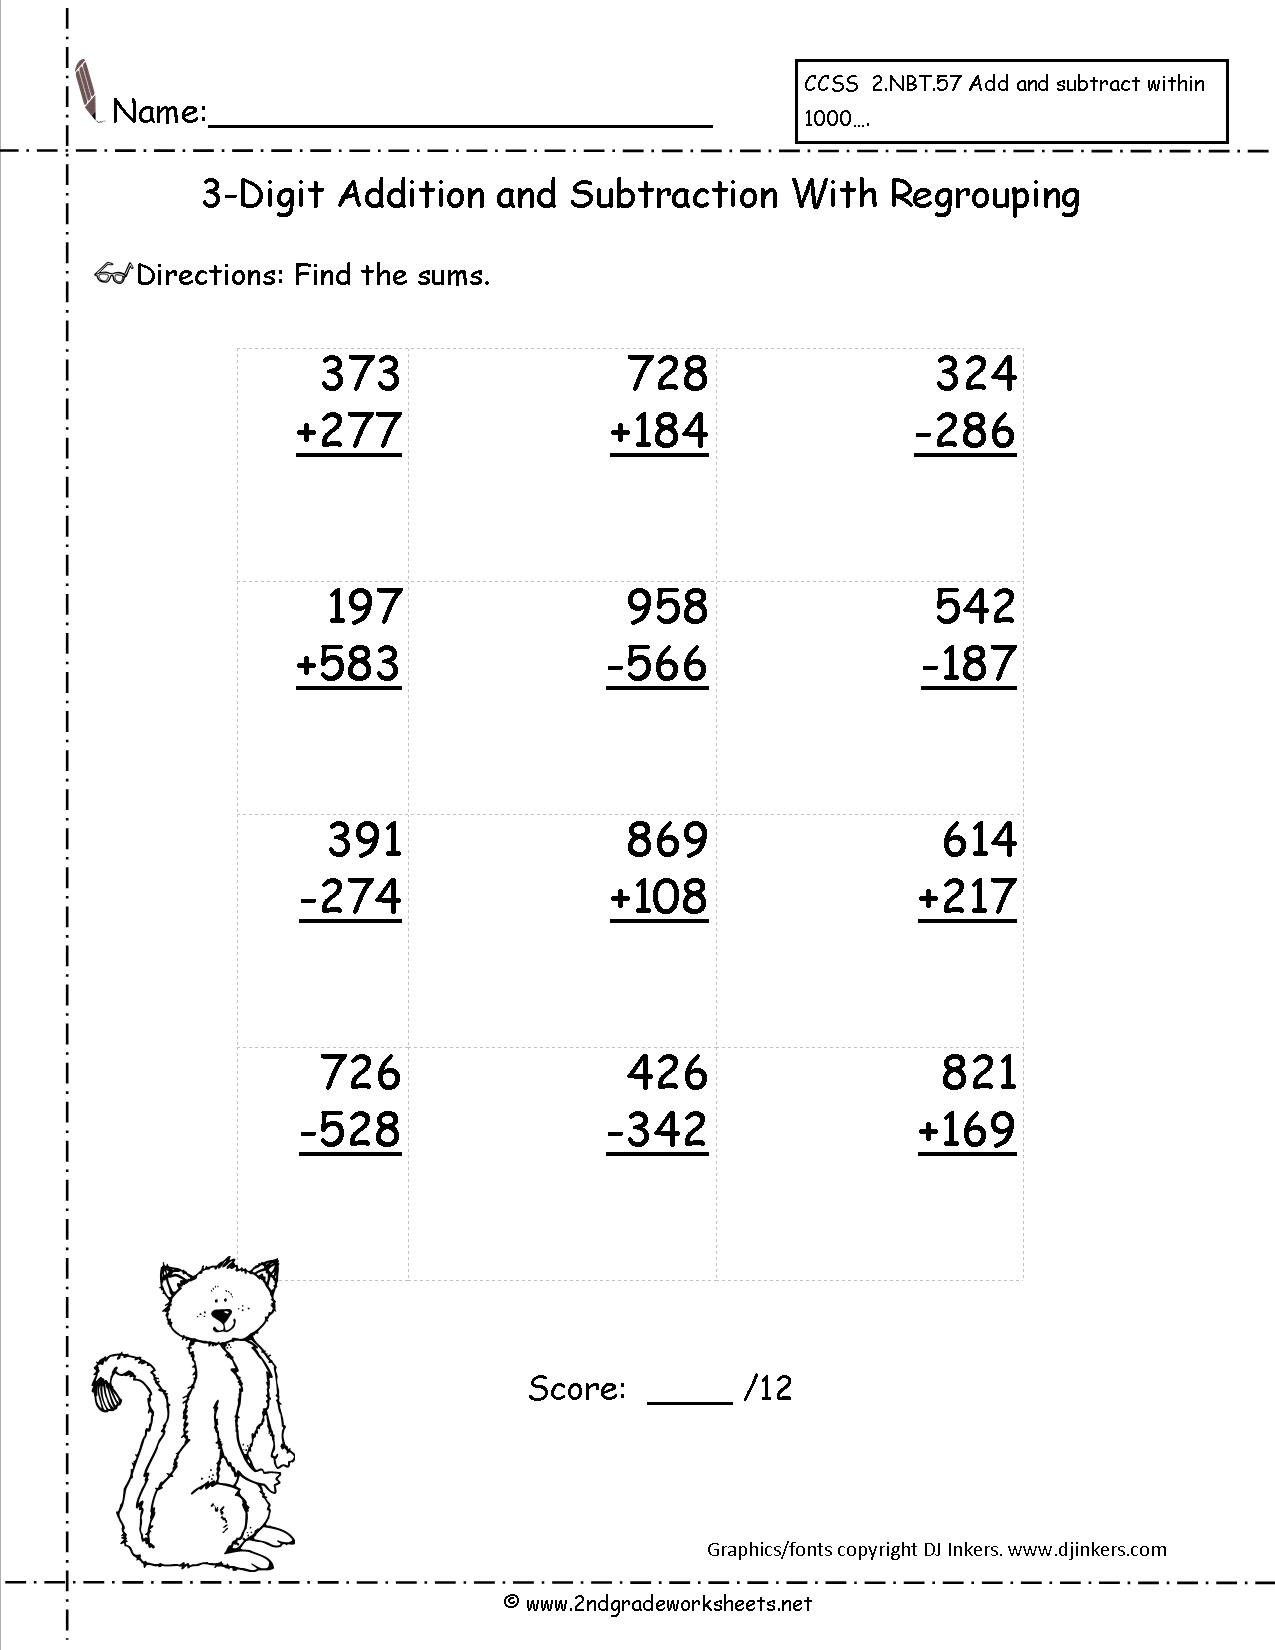 Free Printable 3 Digit Subtraction With Regrouping Worksheets Free Printable